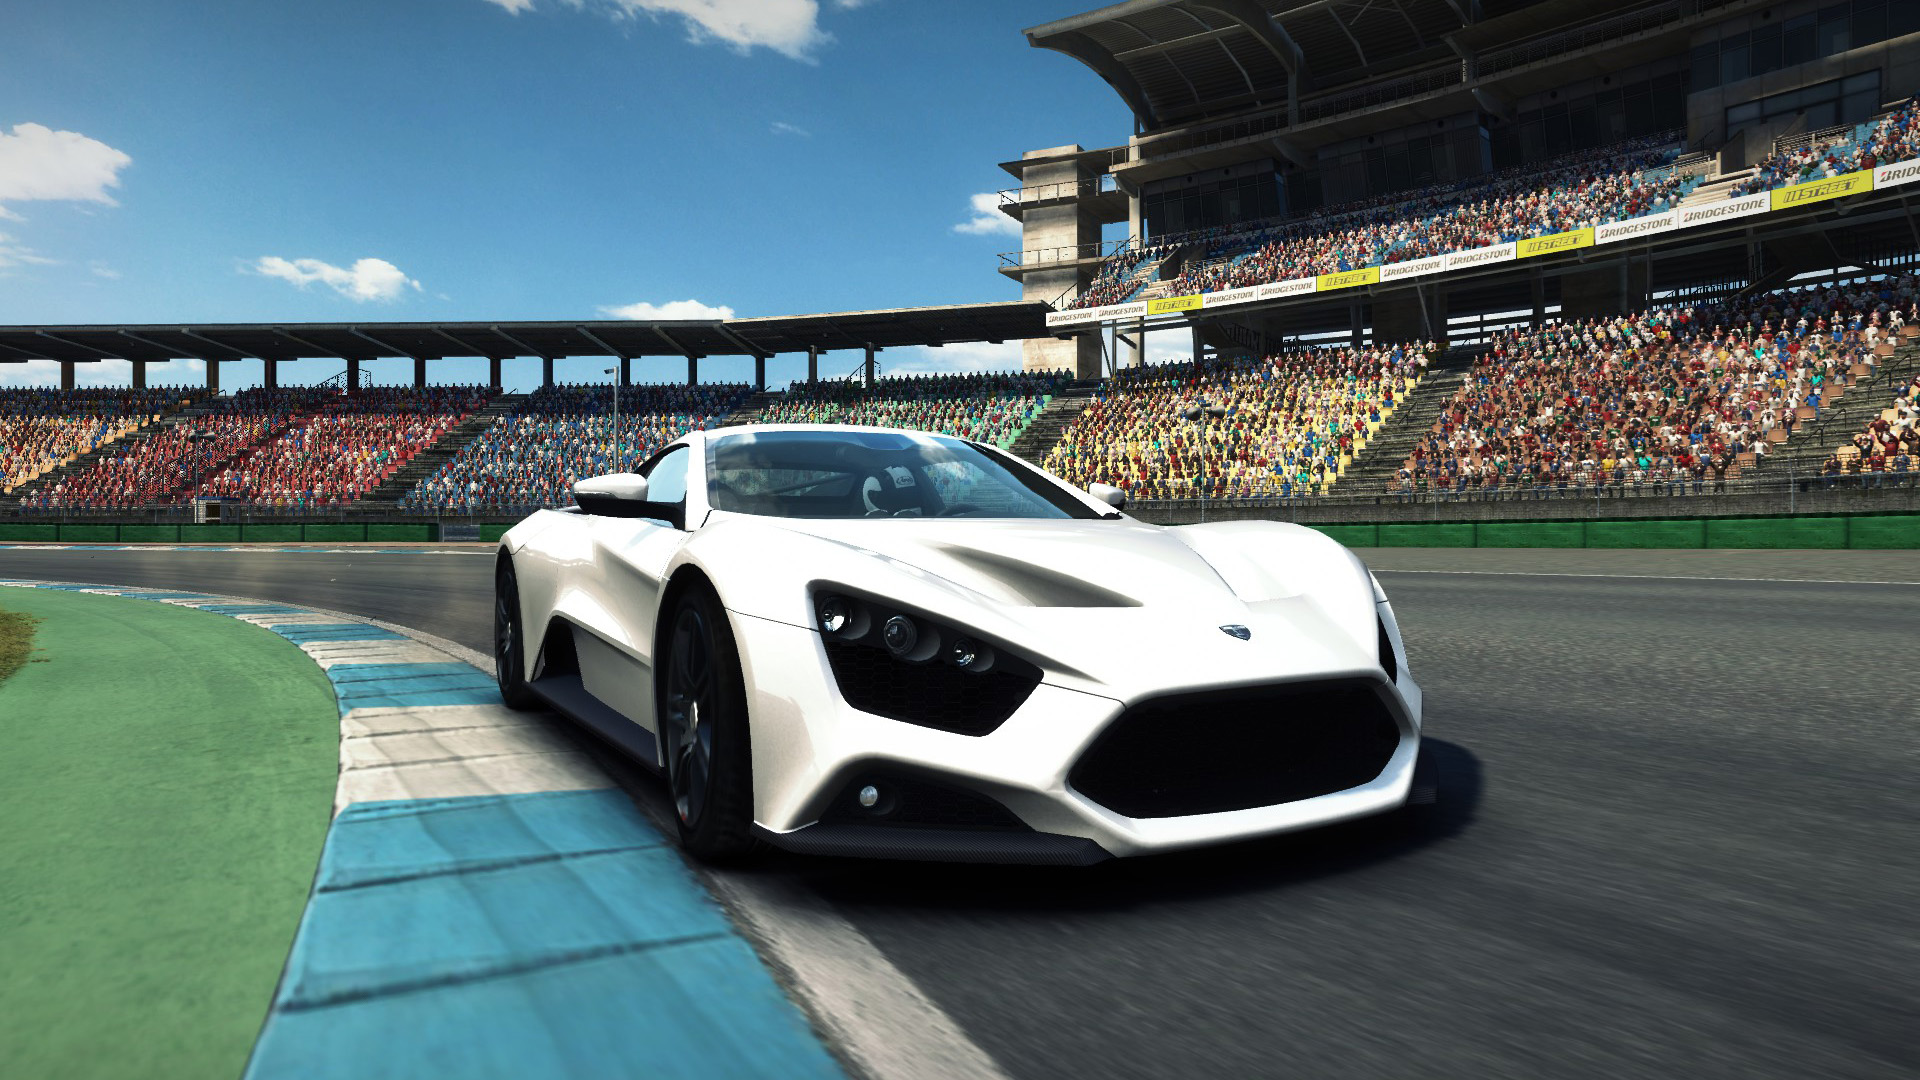 racing master android requirements